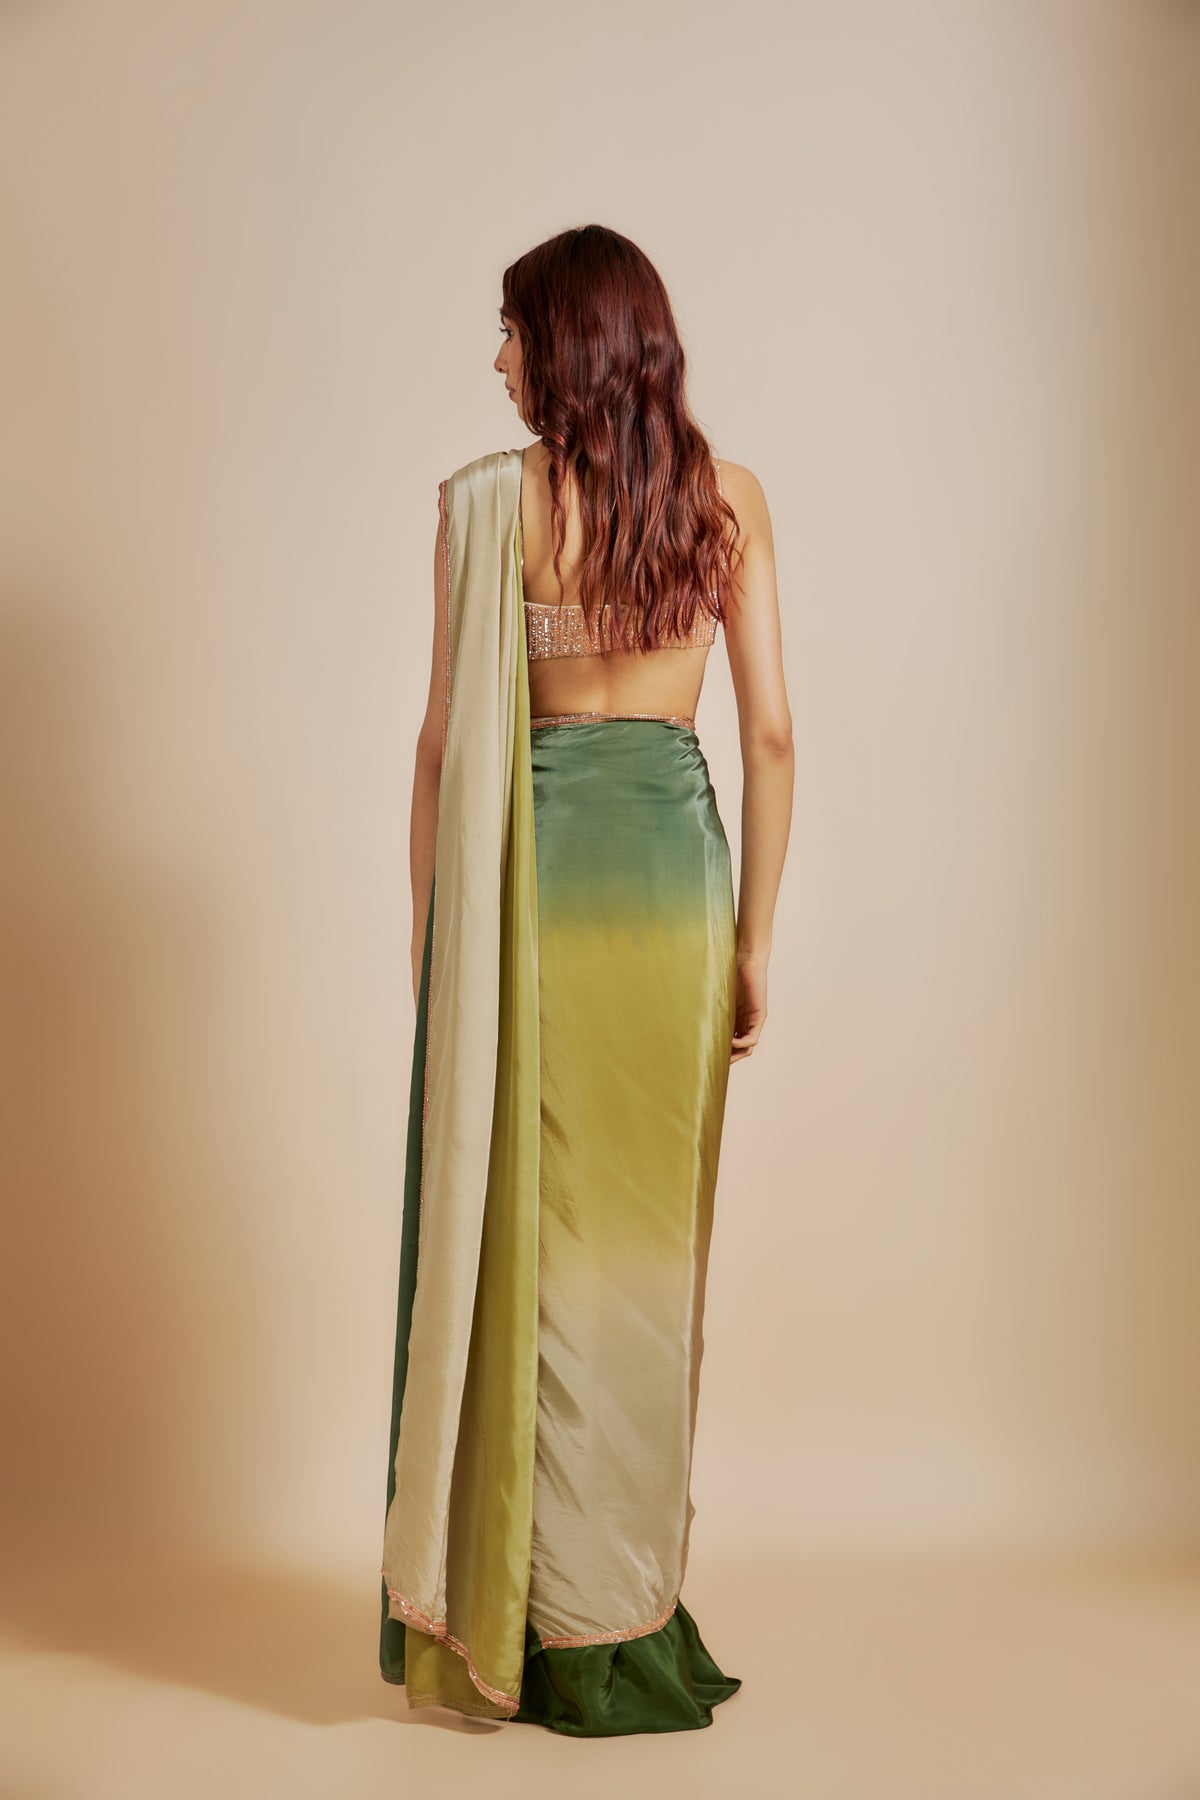 Green Ombre Saree With Embroidered Blouse